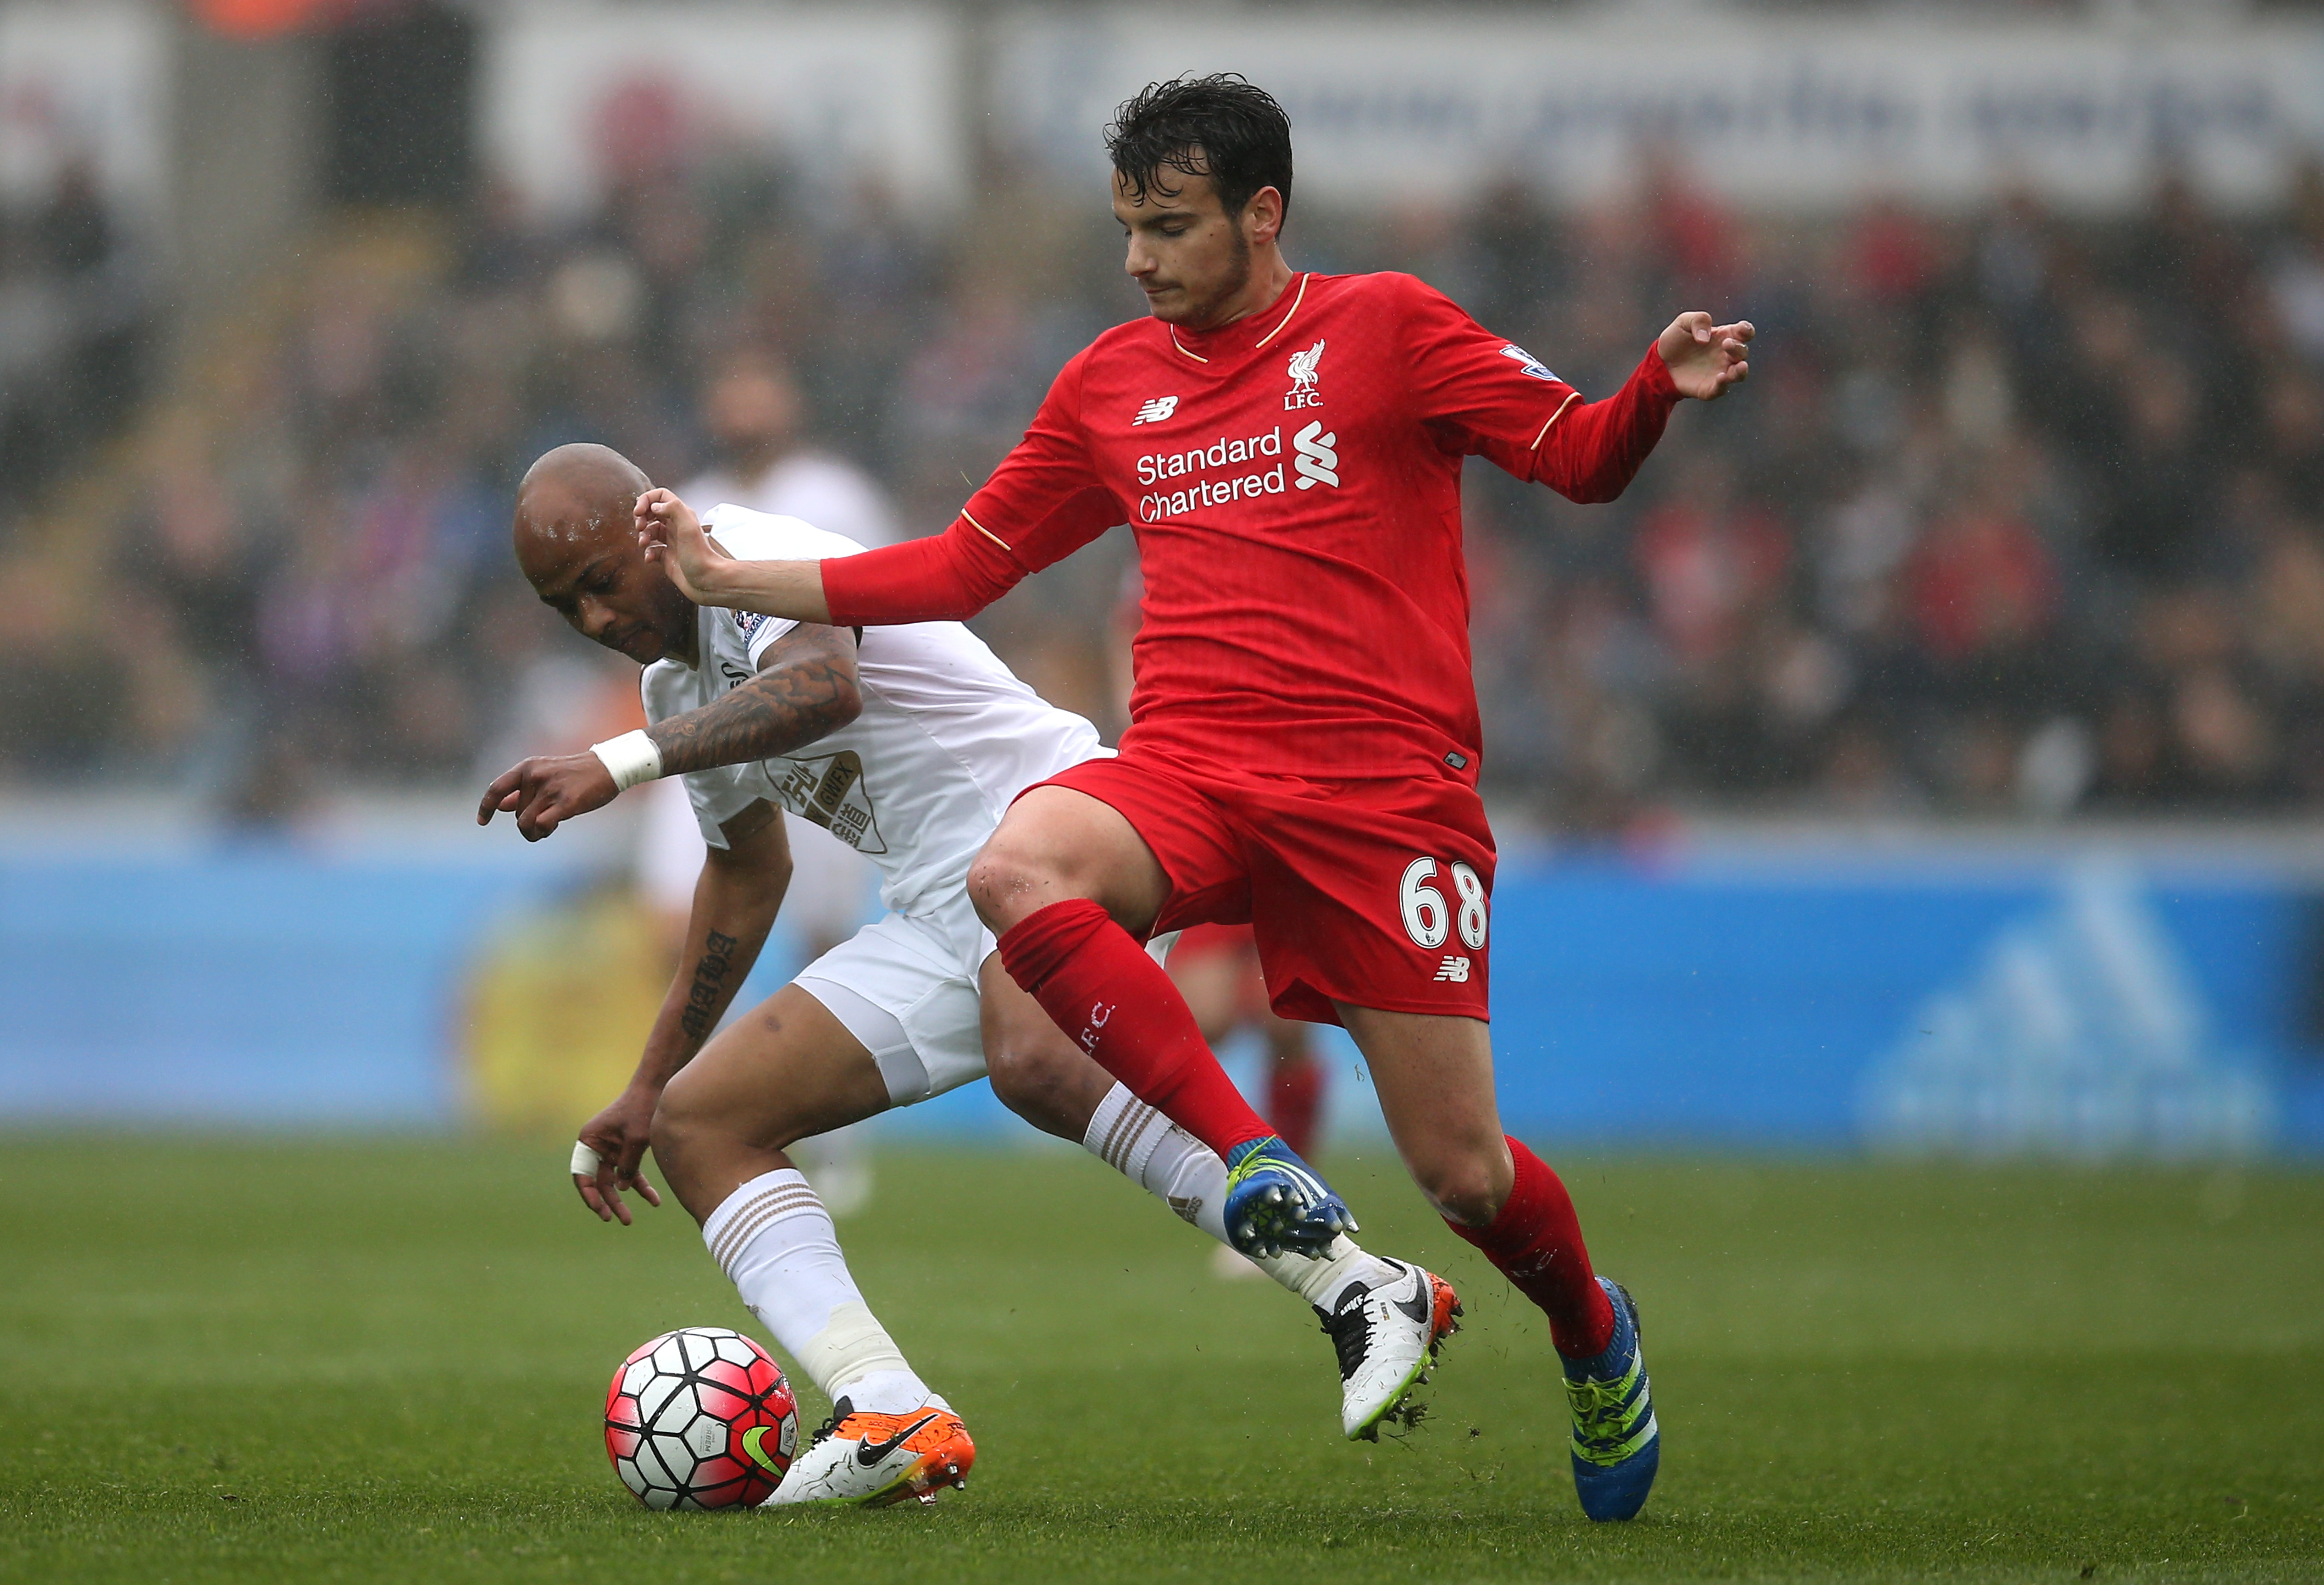 SWANSEA, WALES - MAY 01: Pedro Chirivella of Liverpool is closed down by Andre Ayew of Swansea City during the Barclays Premier League match between Swansea City and Liverpool at The Liberty Stadium on May 1, 2016 in Swansea, Wales.  (Photo by Steve Bardens/Getty Images)